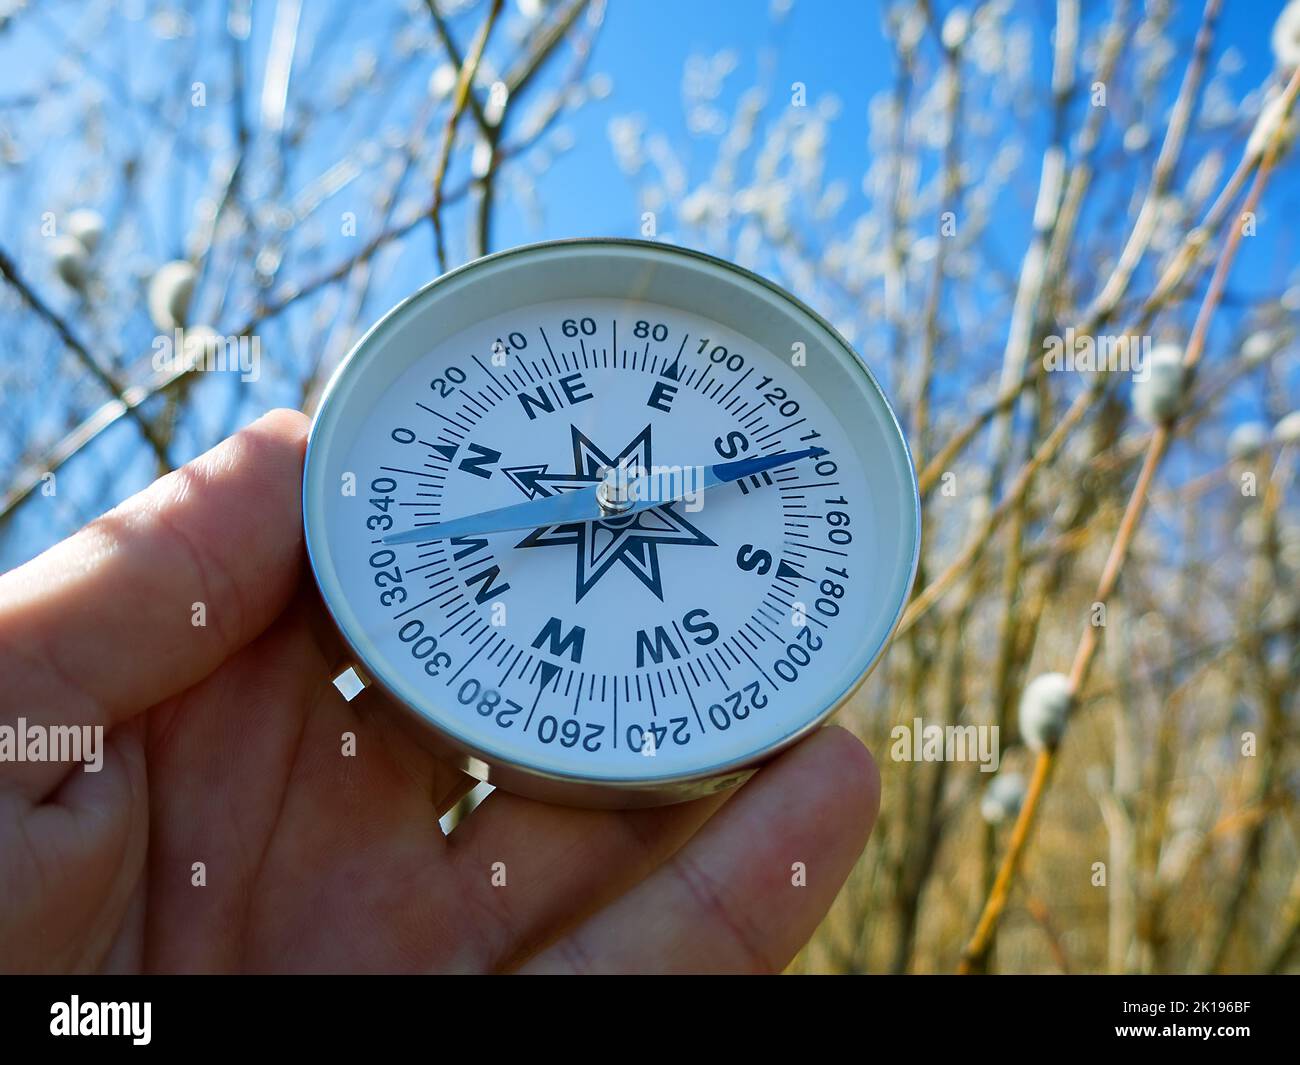 Winter-spring hiking (spring independent travel in forest and river, willow catkins), camping equipment - follow the compass (shoot an azimuth), trail Stock Photo